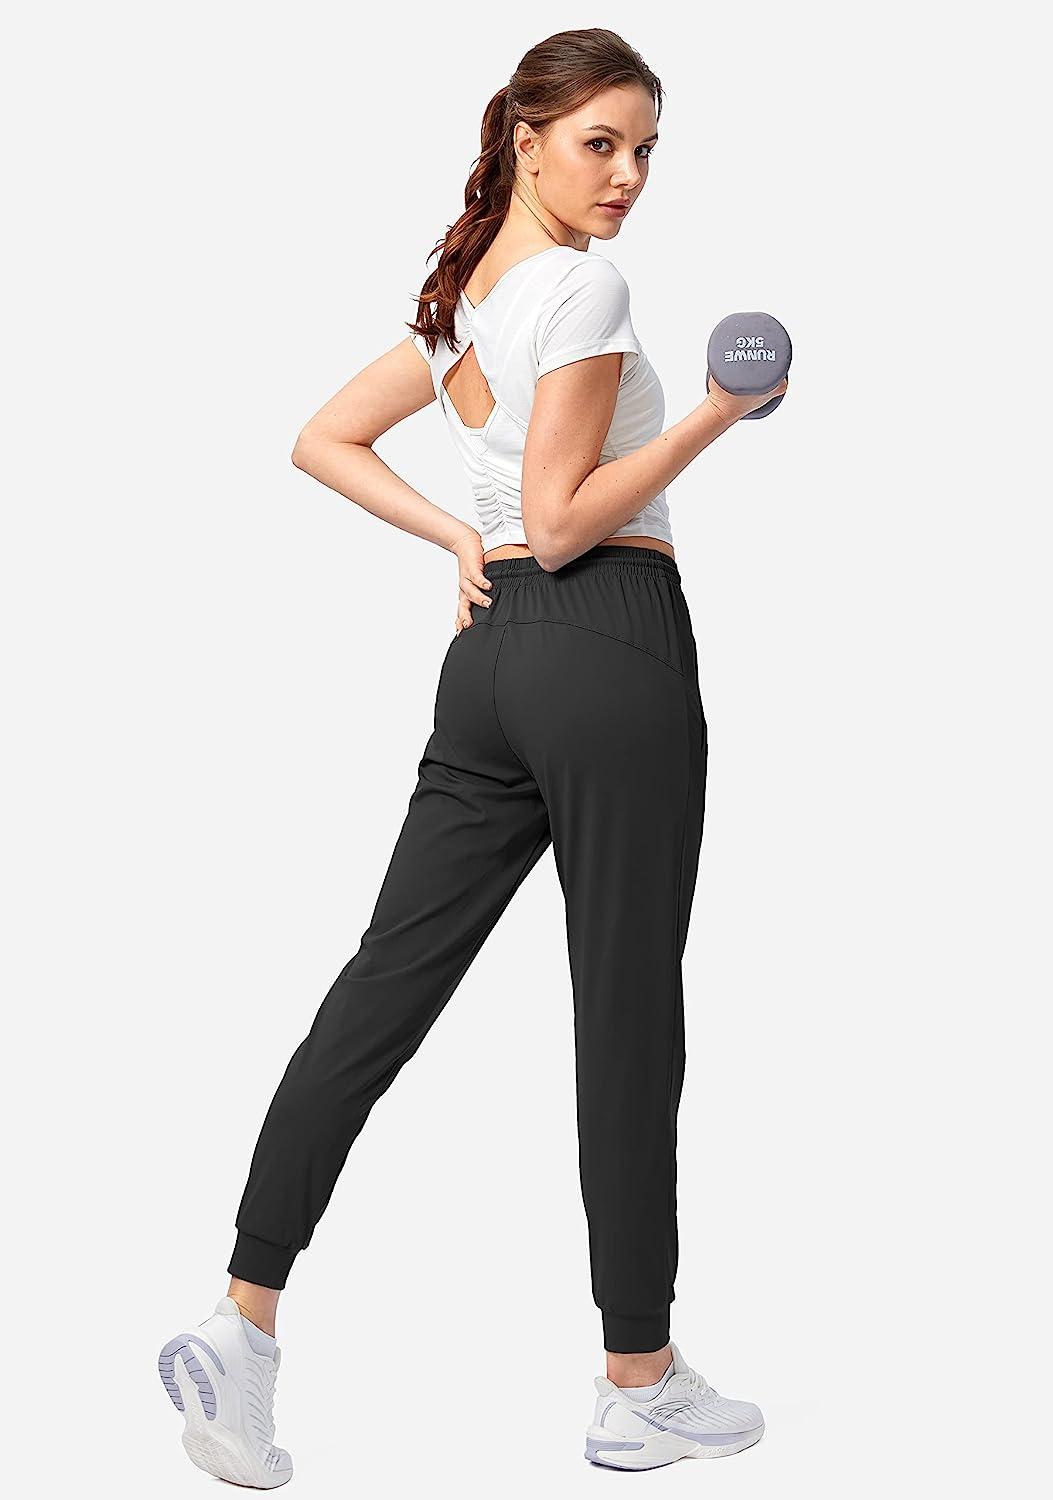 G Gradual Women's Joggers Pants with Zipper Pockets Tapered Running  Sweatpants for Women Lounge - ShopStyle Activewear Trousers